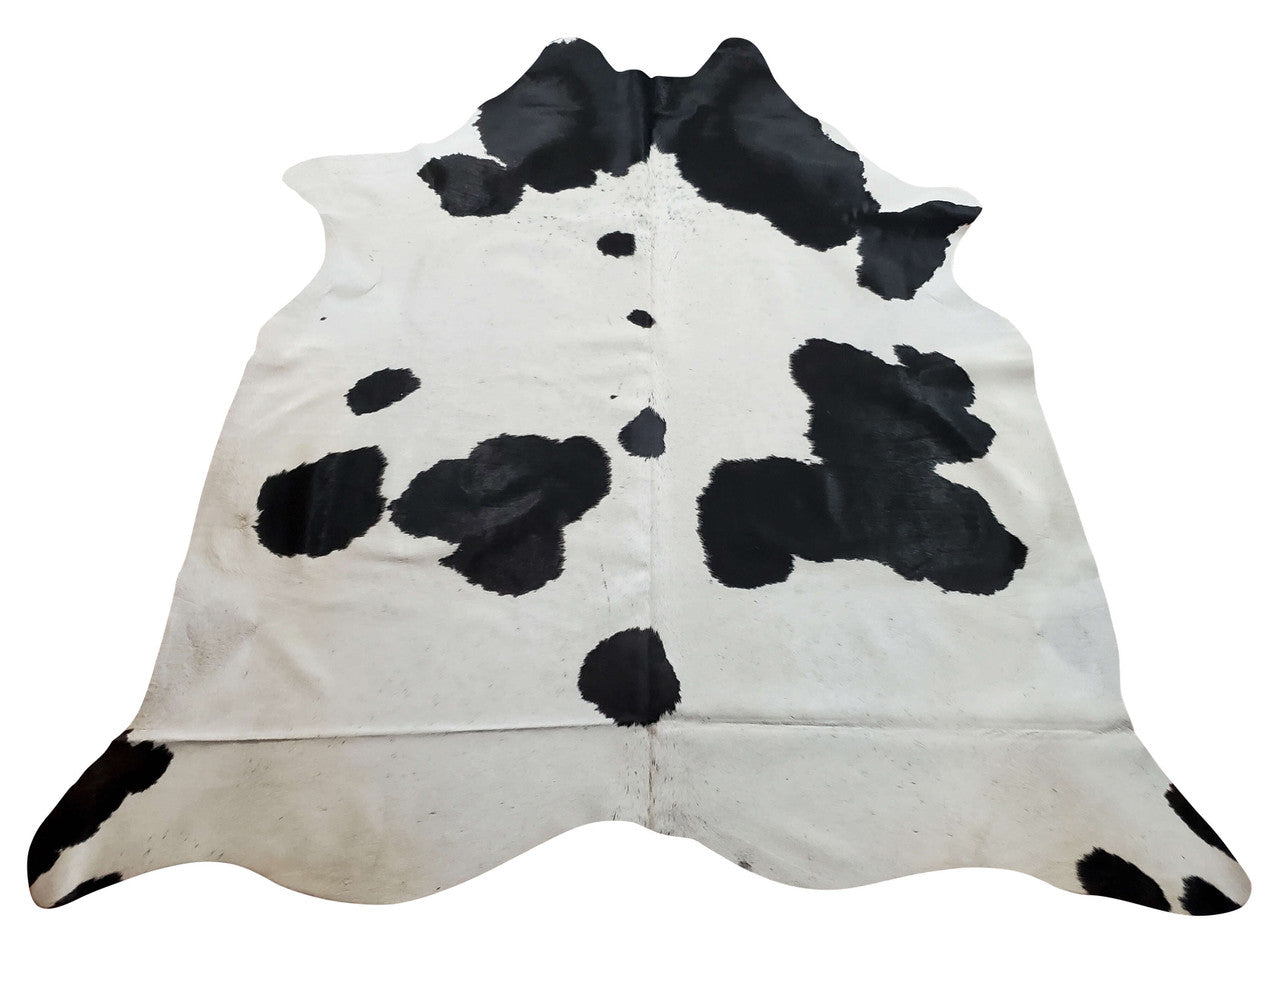 This Brazilian cowhide rug is soft, and the most comfortable thing to step out of bed onto in the morning - organic, authentic, and pure.
